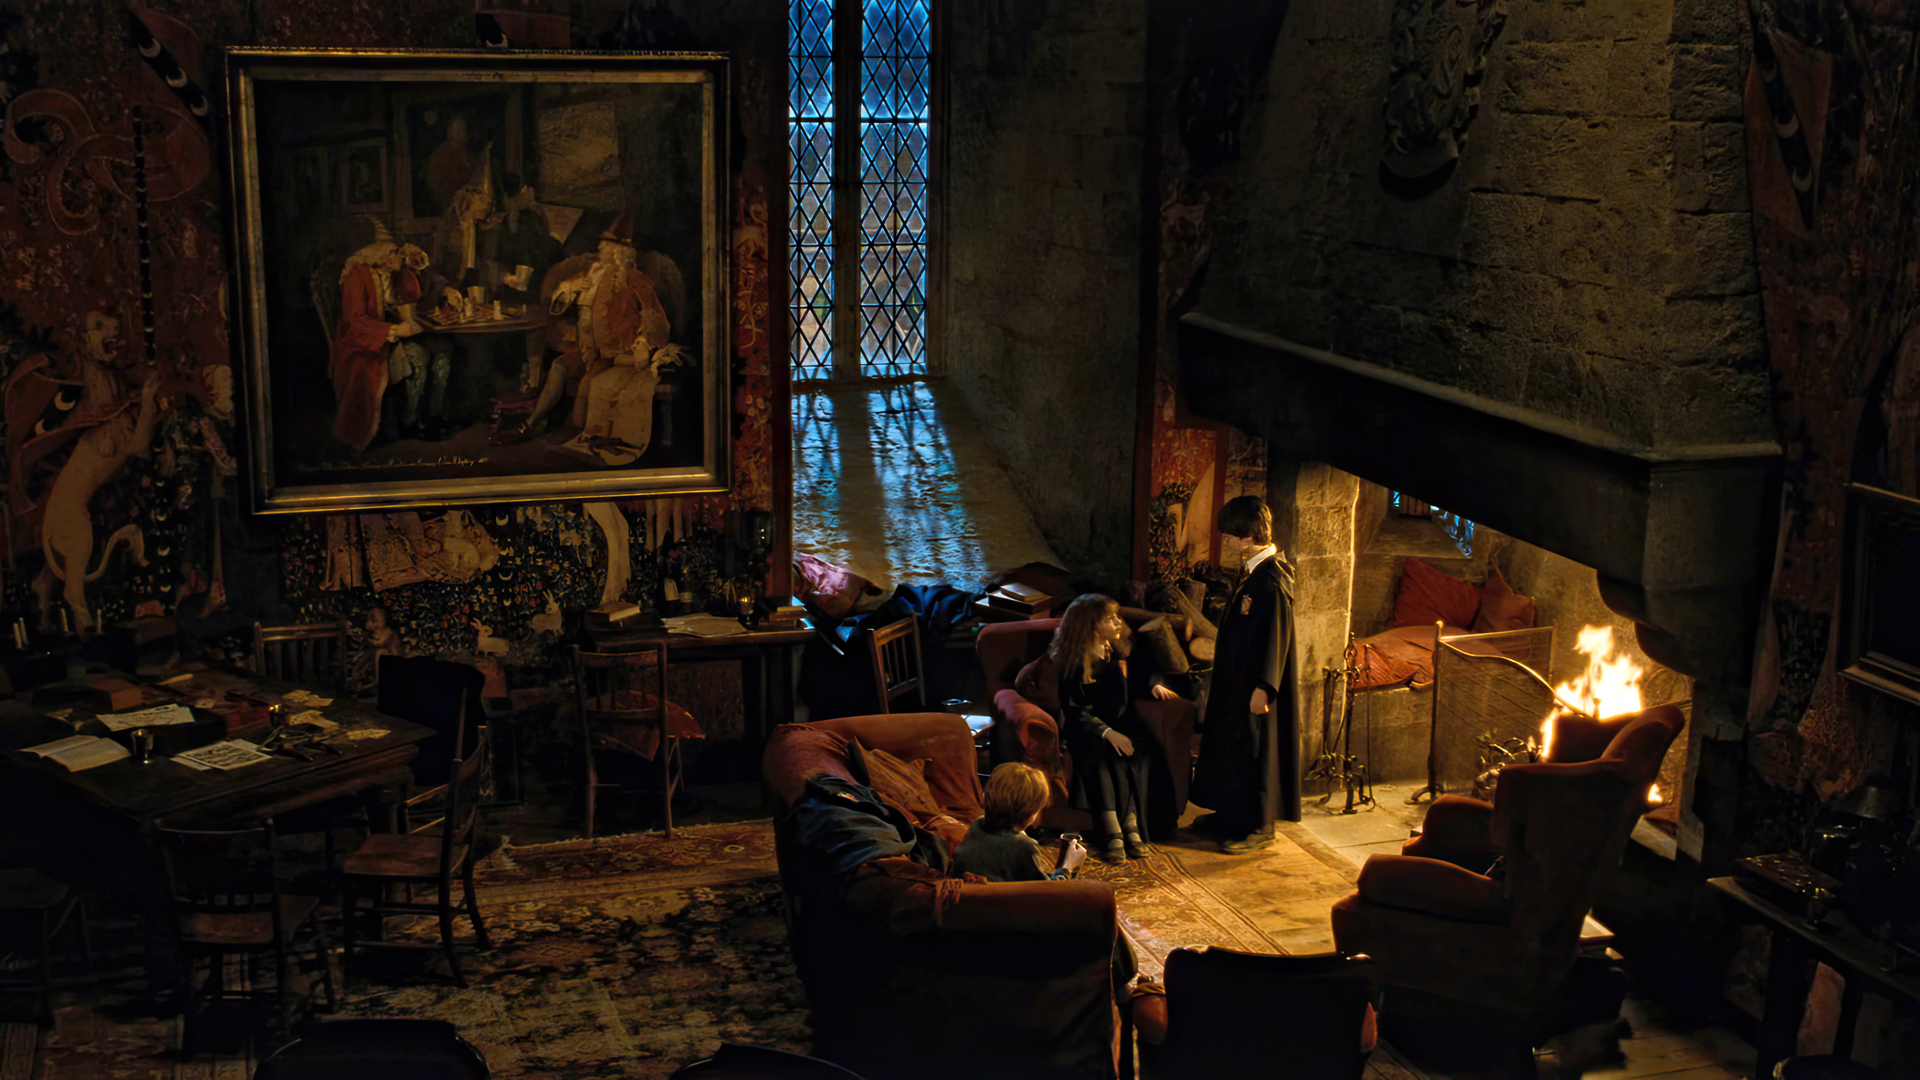 People 1920x1080 Harry Potter and the Sorcerer's Stone movies film stills J.K. Rowling Harry Potter Hermione Granger Ron Weasley Daniel Radcliffe Emma Watson Rupert Grint Gryffindor fire couch chair painting table window fireplace